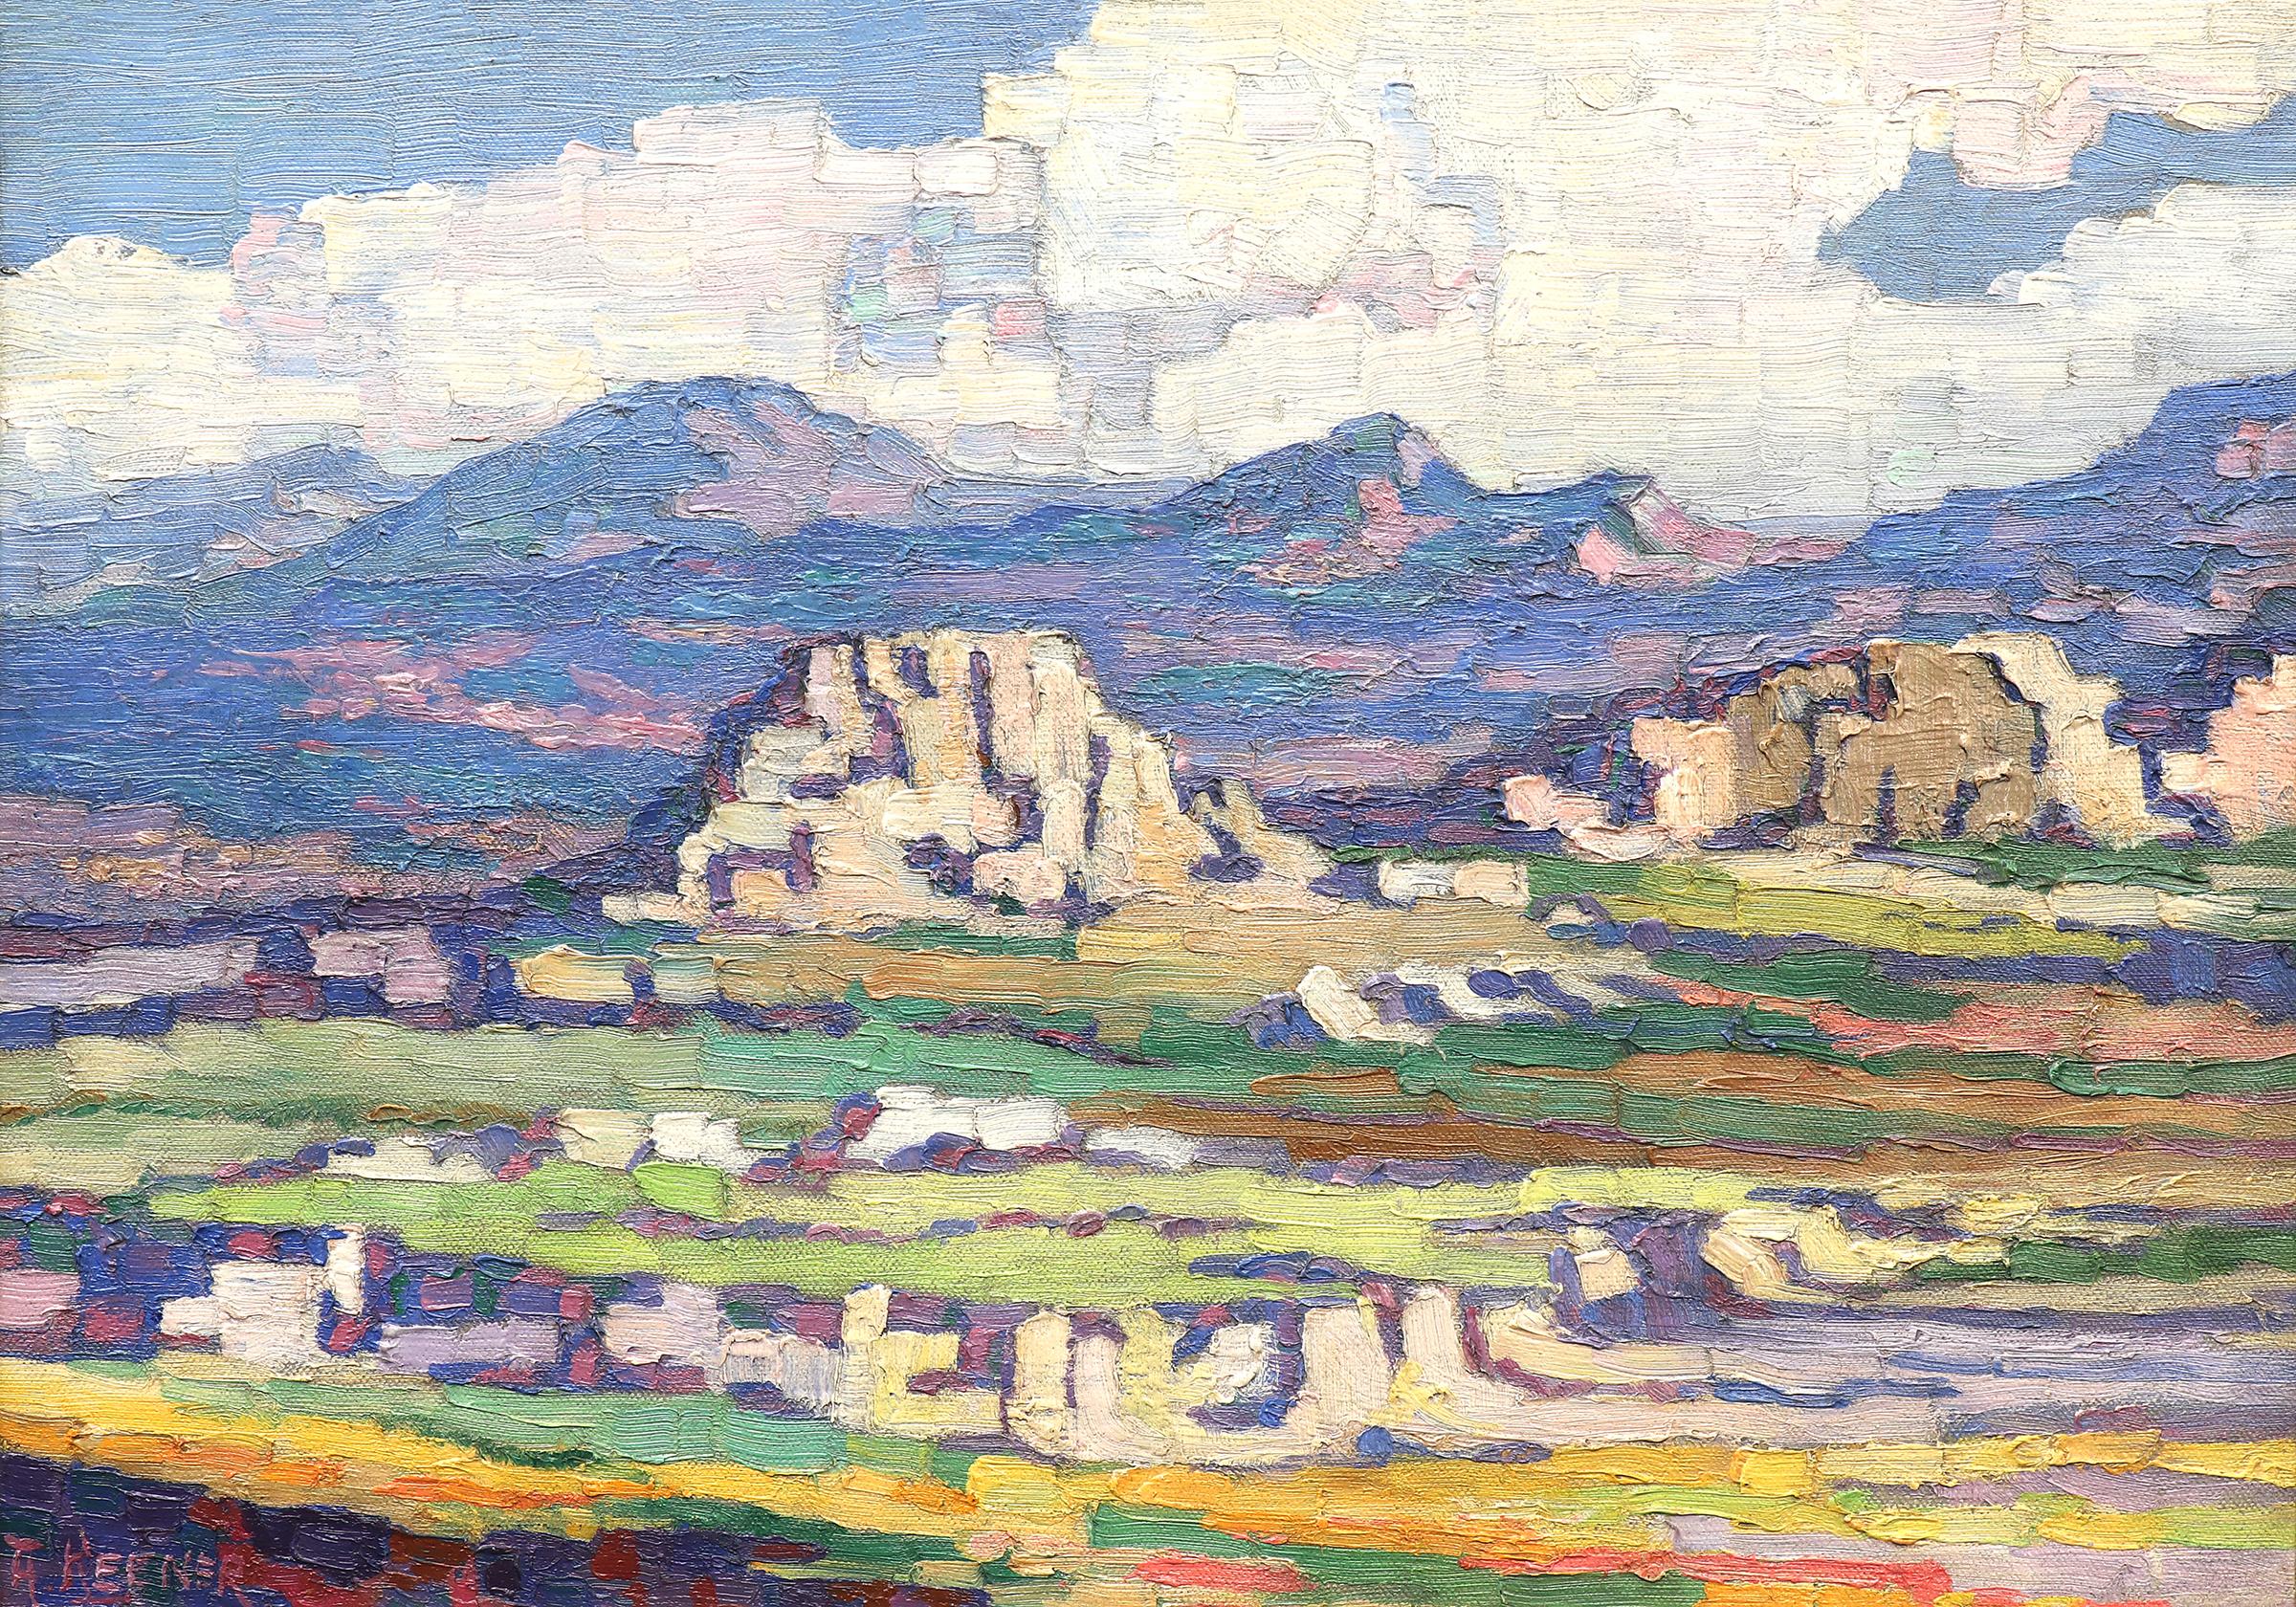 Oil on canvas painting by Anna Elizabeth Keener (1895-1982) titled 'Chalk Butte (Montana)' painted circa 1916. Signed lower left, titled verso by the artist. Presented in a custom frame measuring 16 ¾ x 22 ½ inches; image size is 13 ¾ x 19 ½